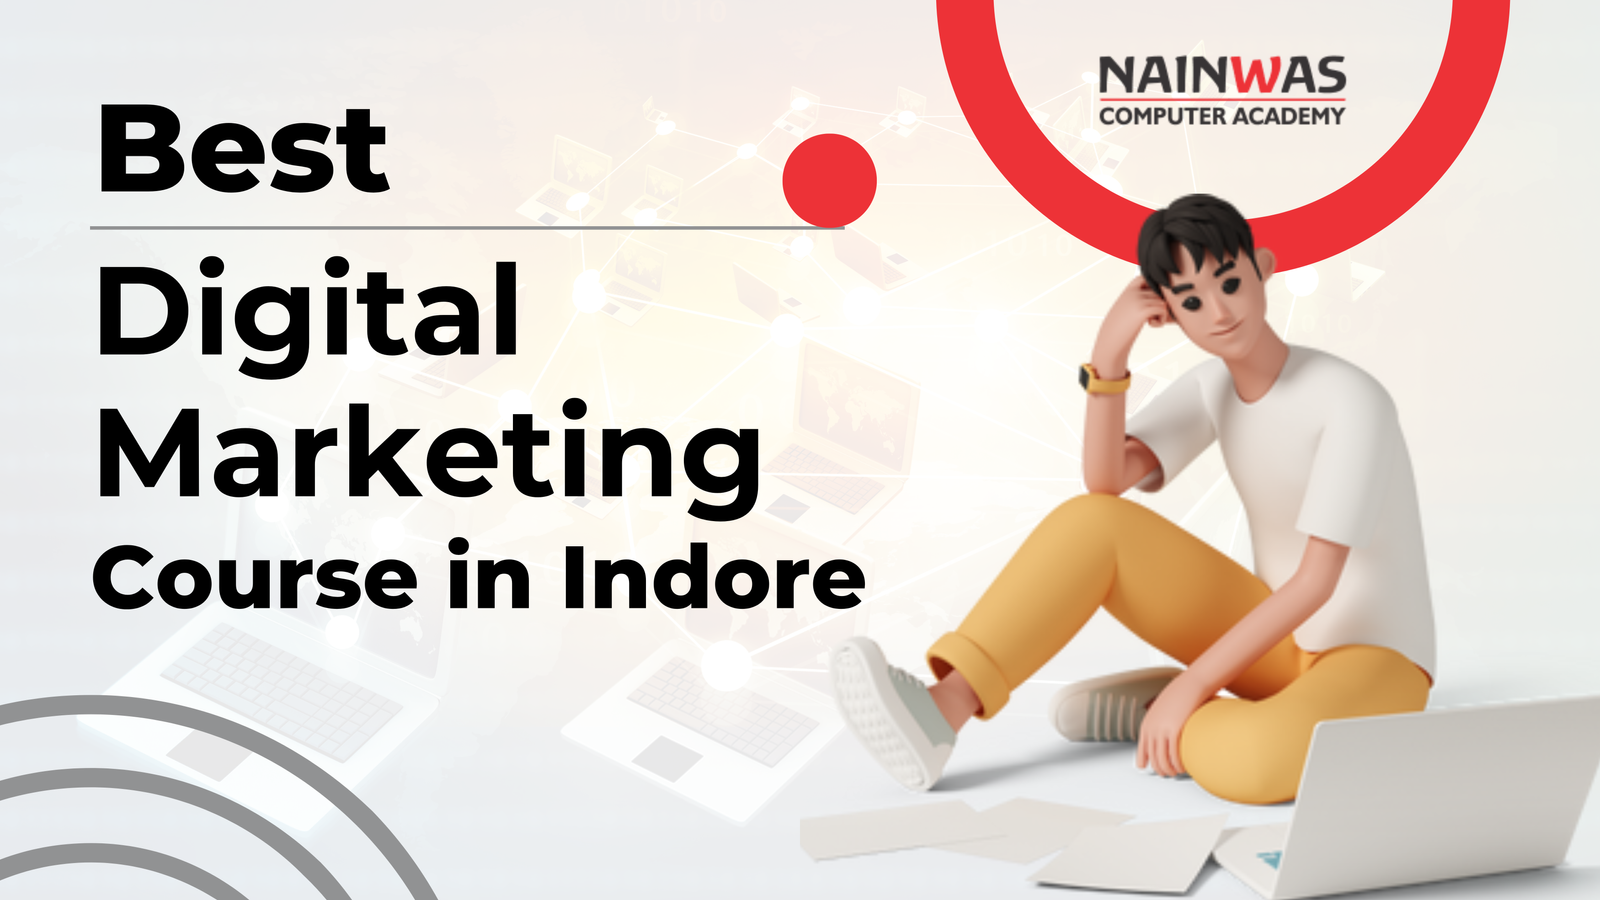 The Best Digital Marketing Course in Indore: Nainwas Computer Academy